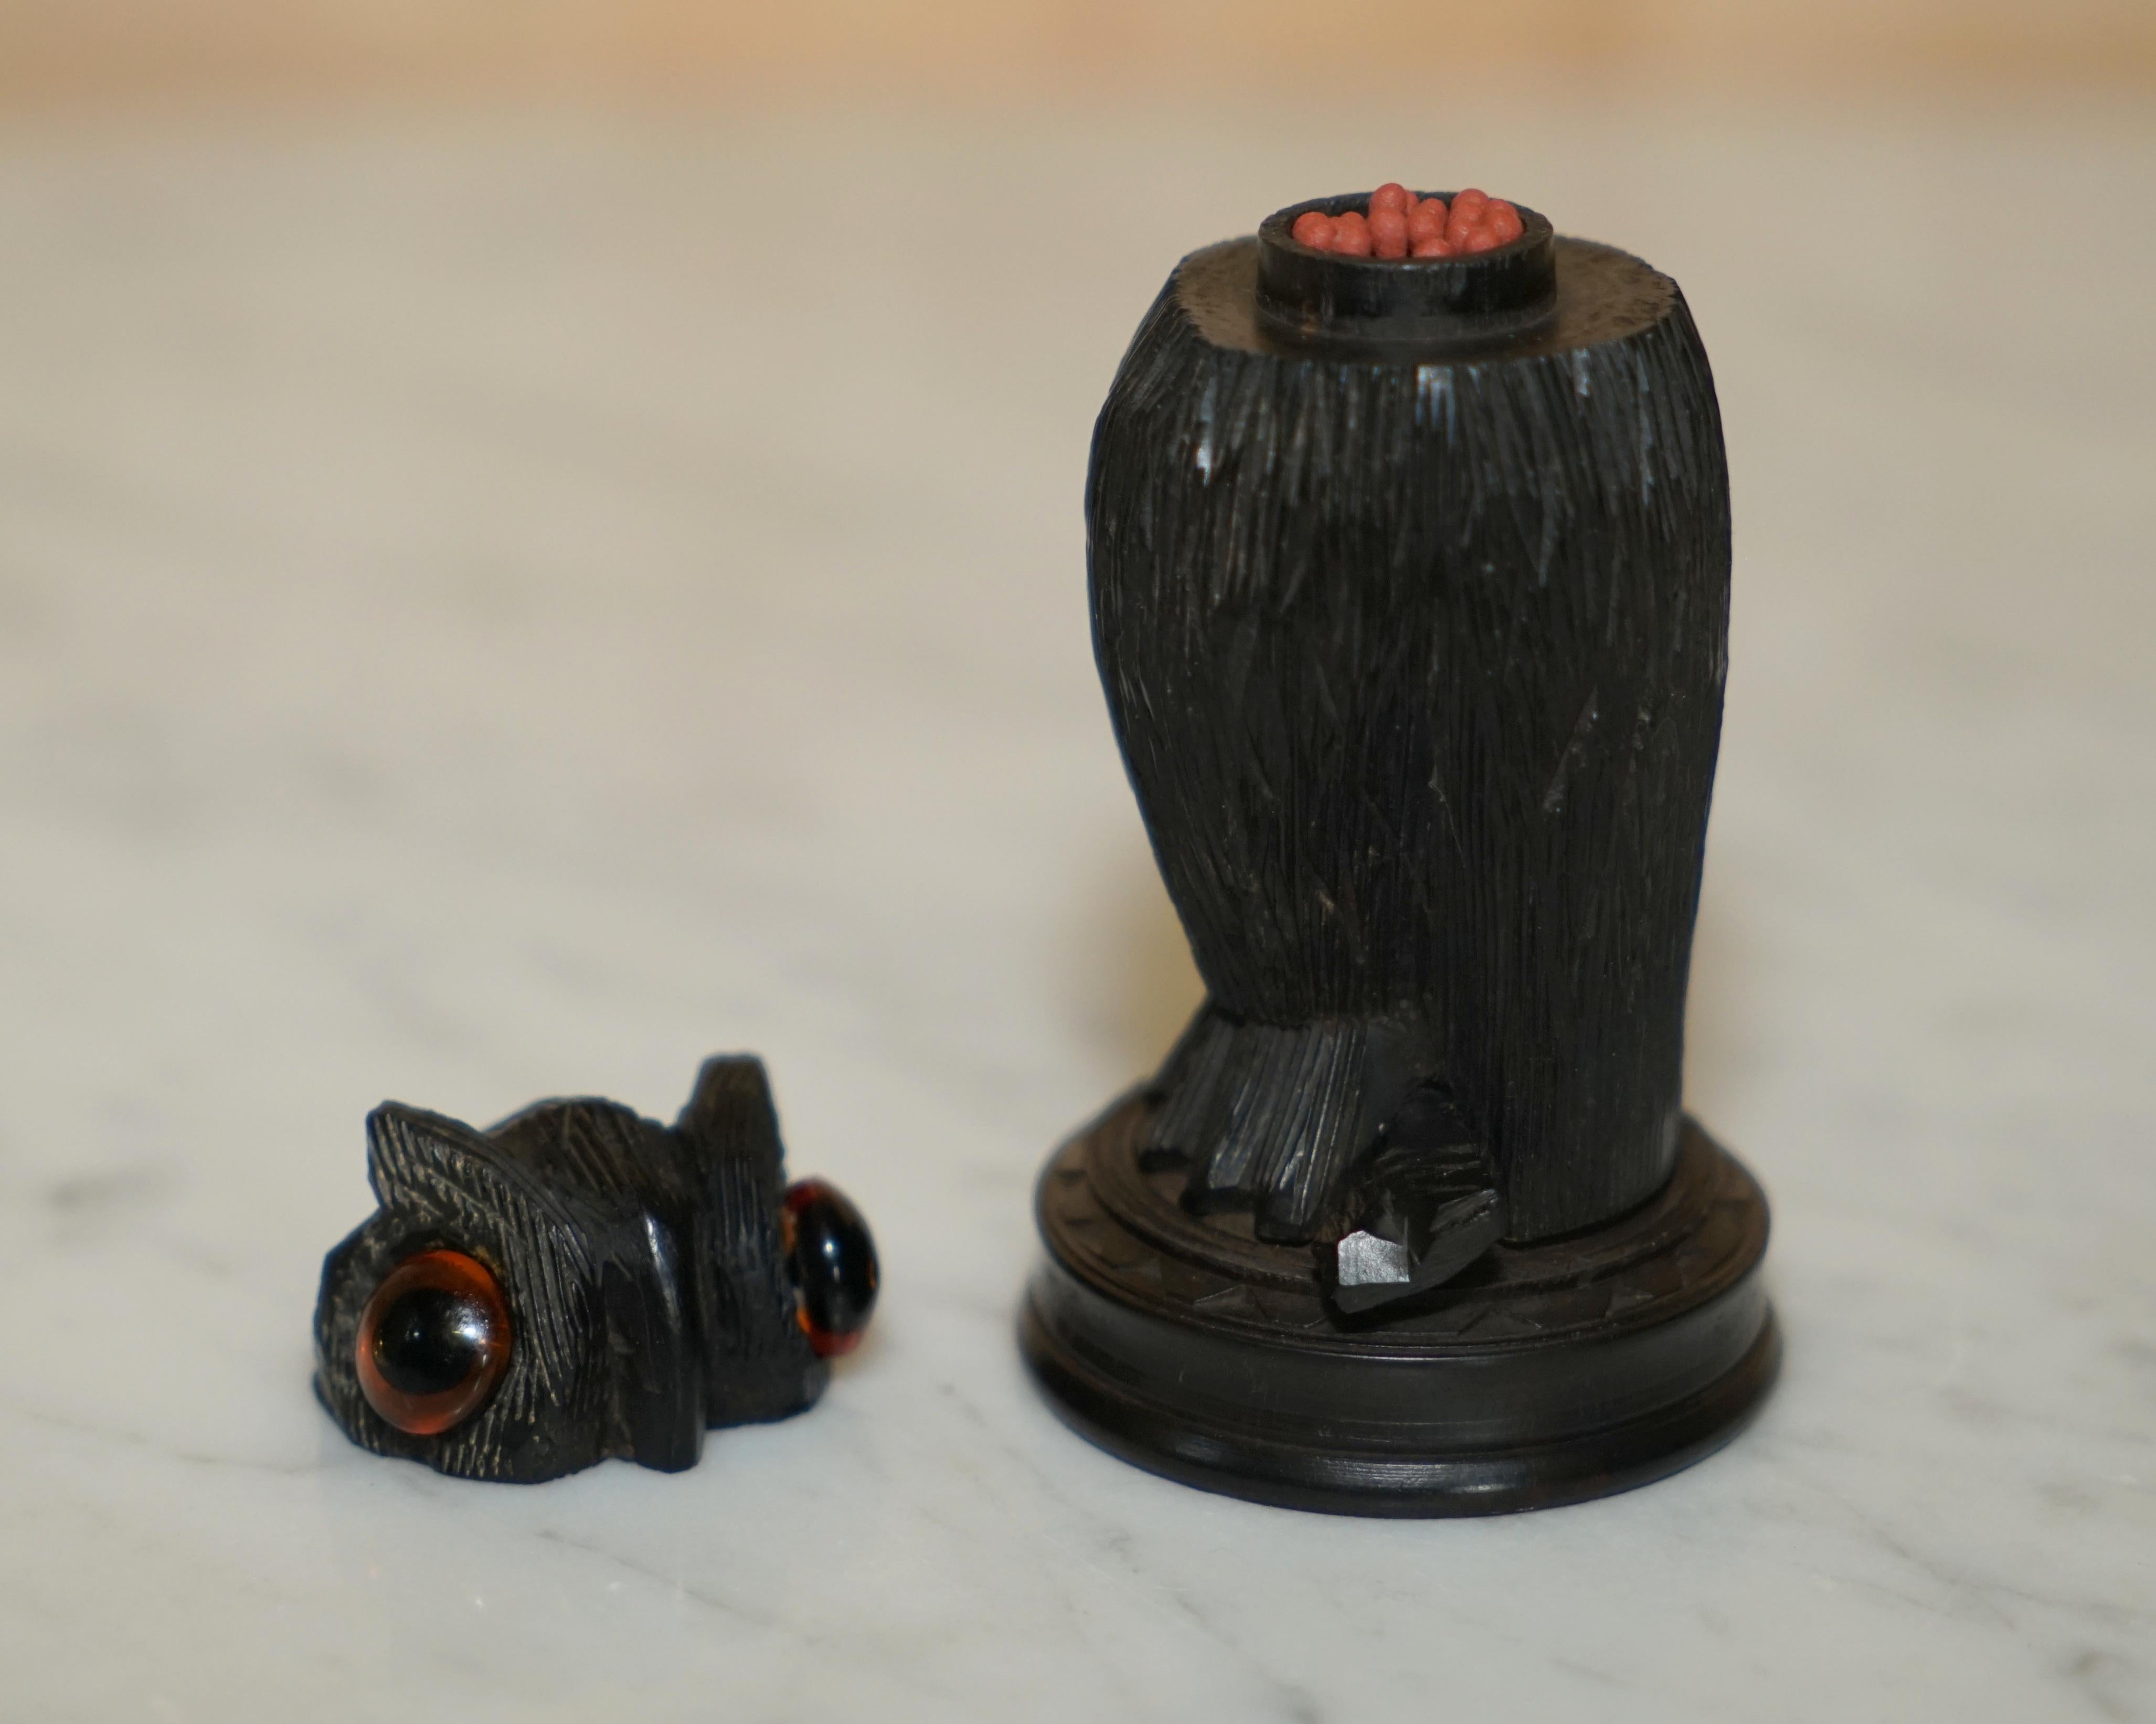 9 Antique Black Forest Wood Carved Owl Matchstick Holders Ashtray Ink Pot Candle 6